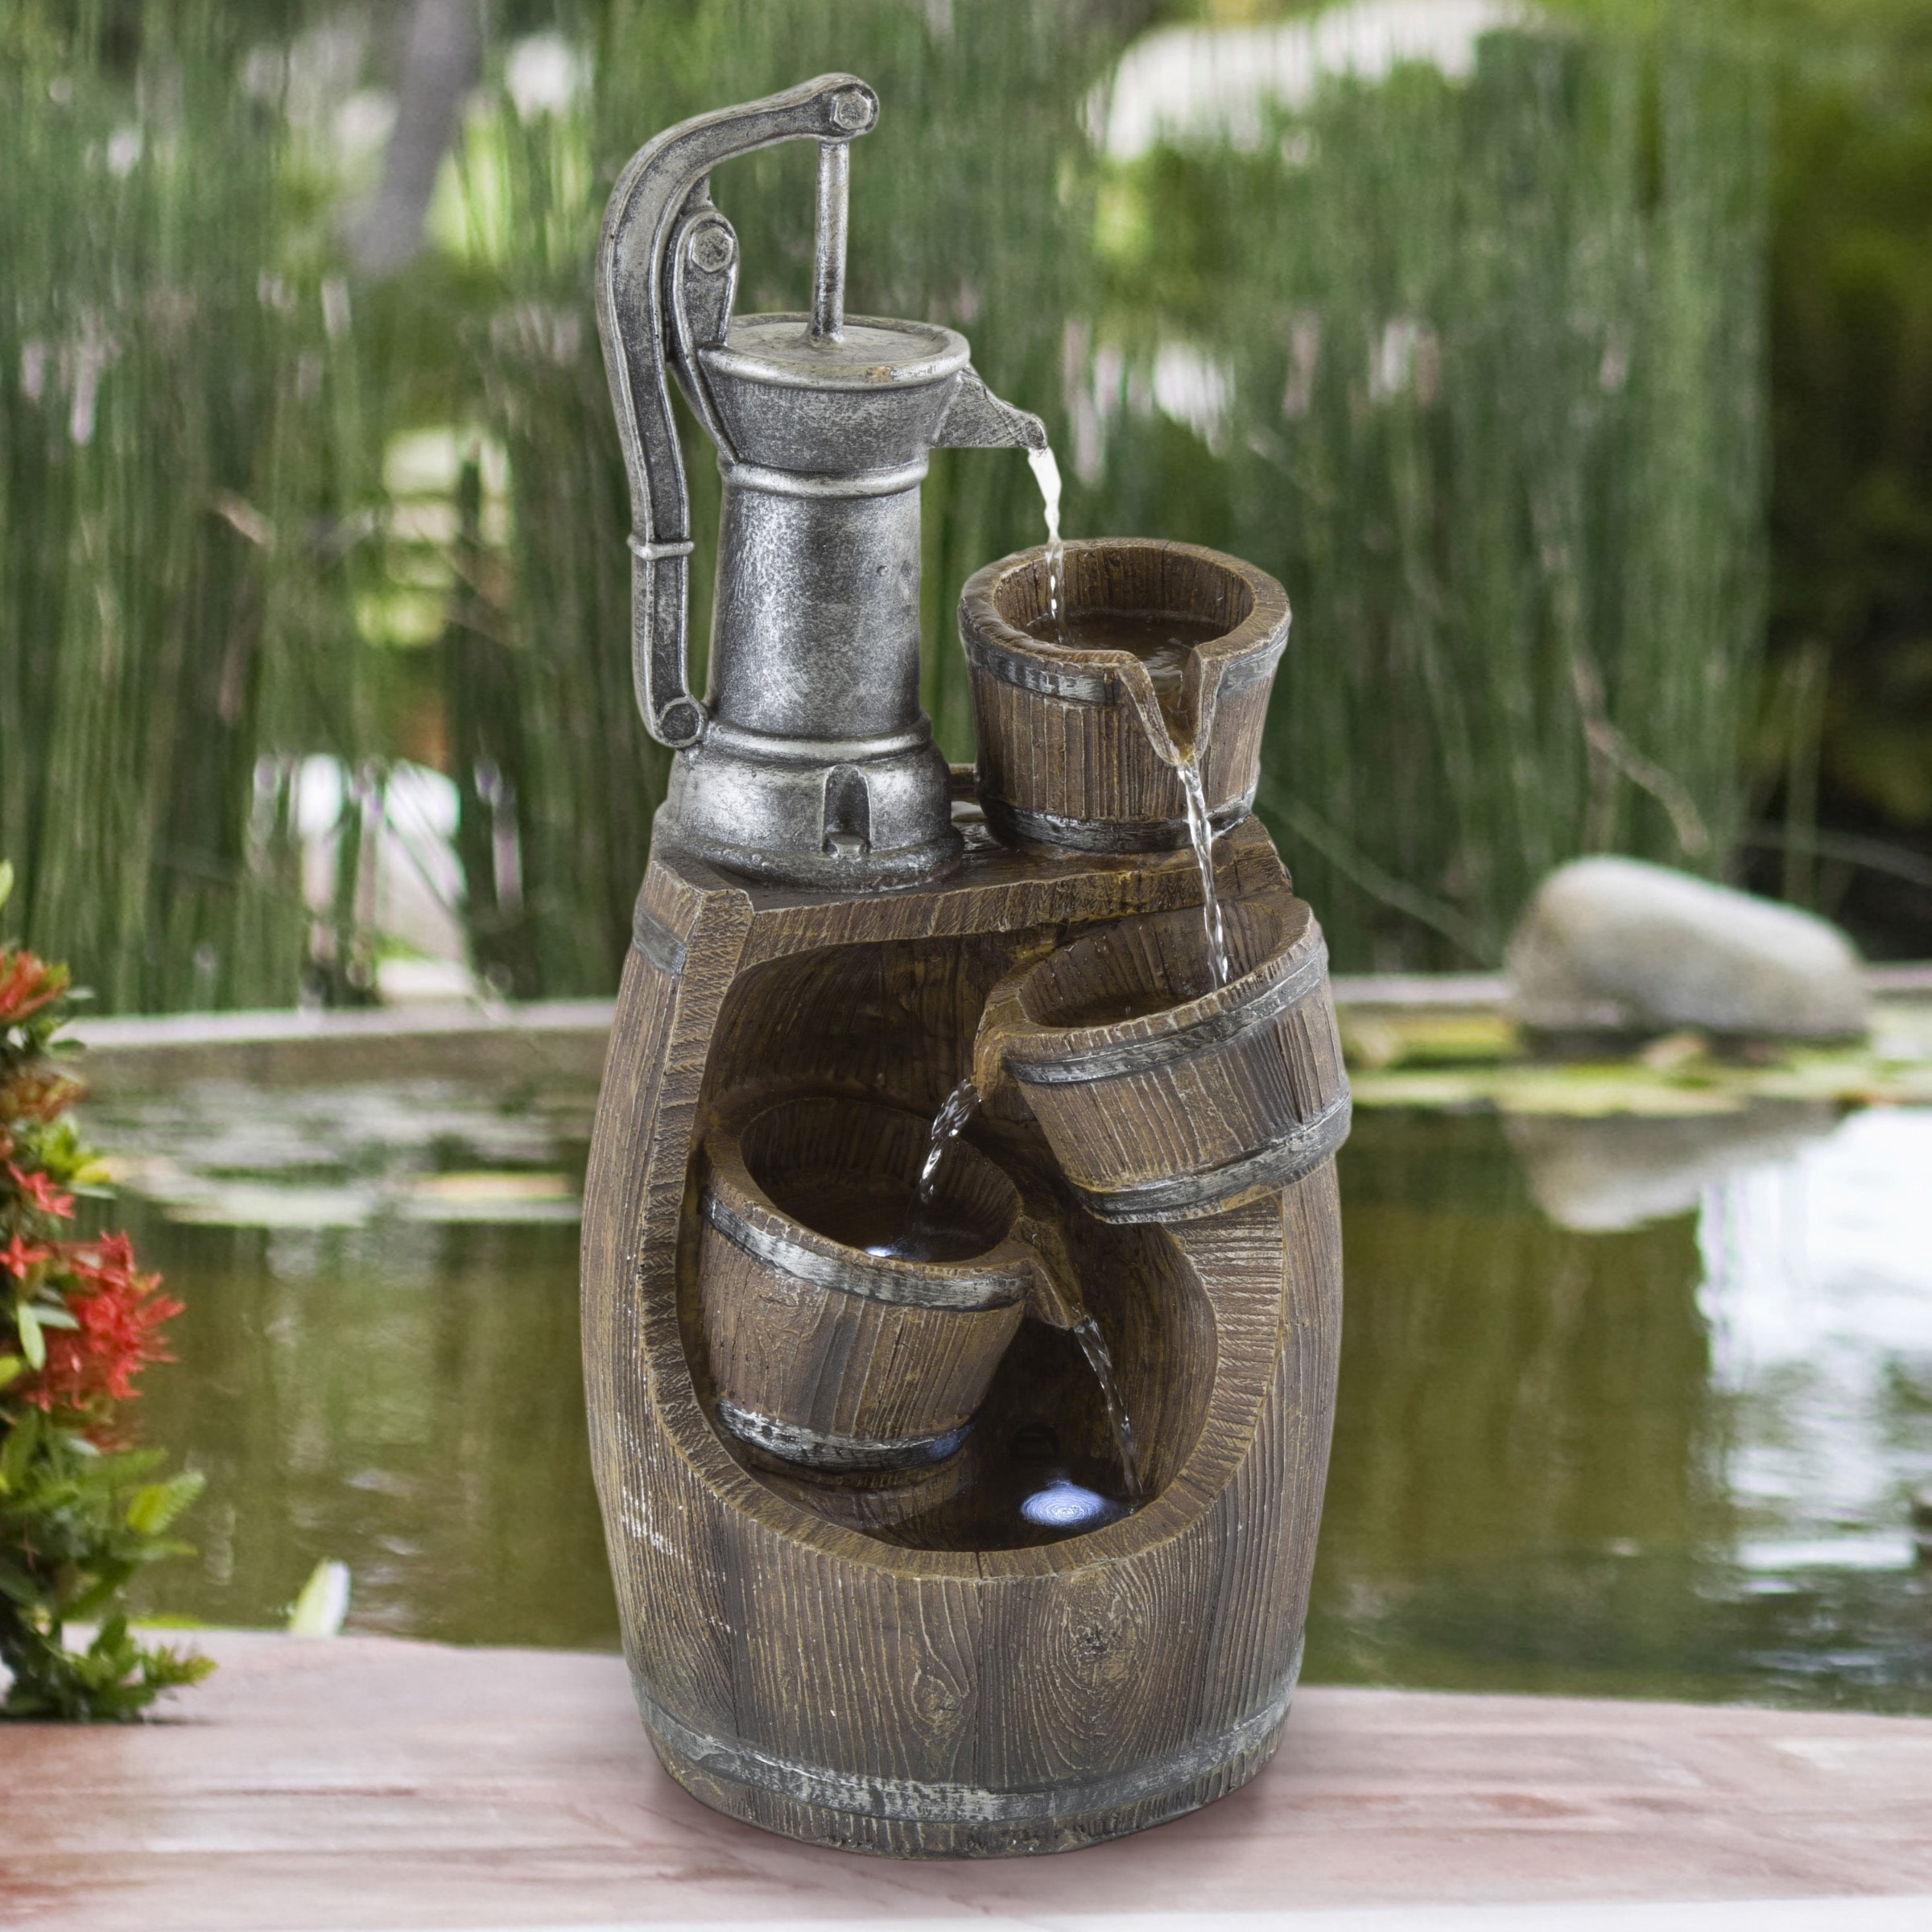 Old Fashion Hand Pump Fountain 4-Tier Polyresin Barrel Cascading Waterfall  with LED Lights Bed Bath  Beyond 37159323